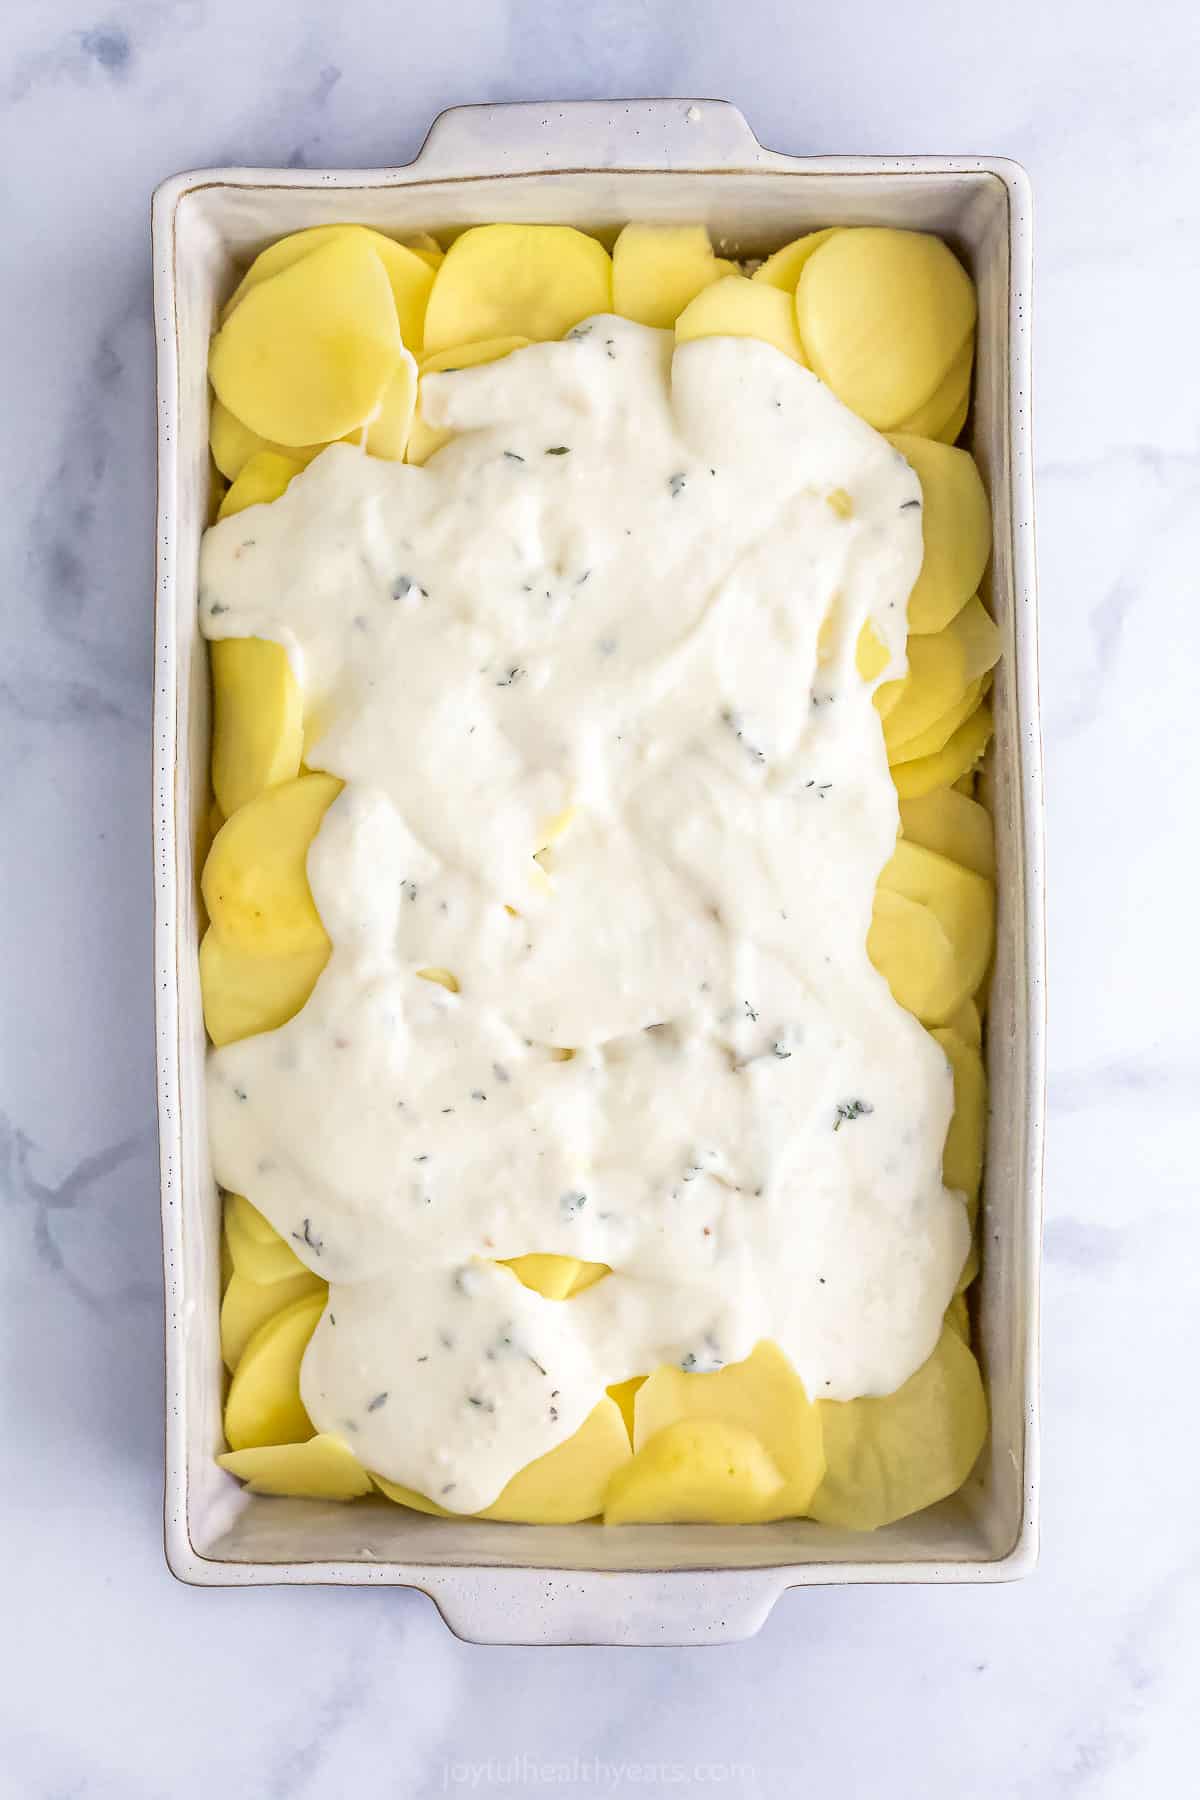 layering potatoes and cheese sauce for scalloped potatoes